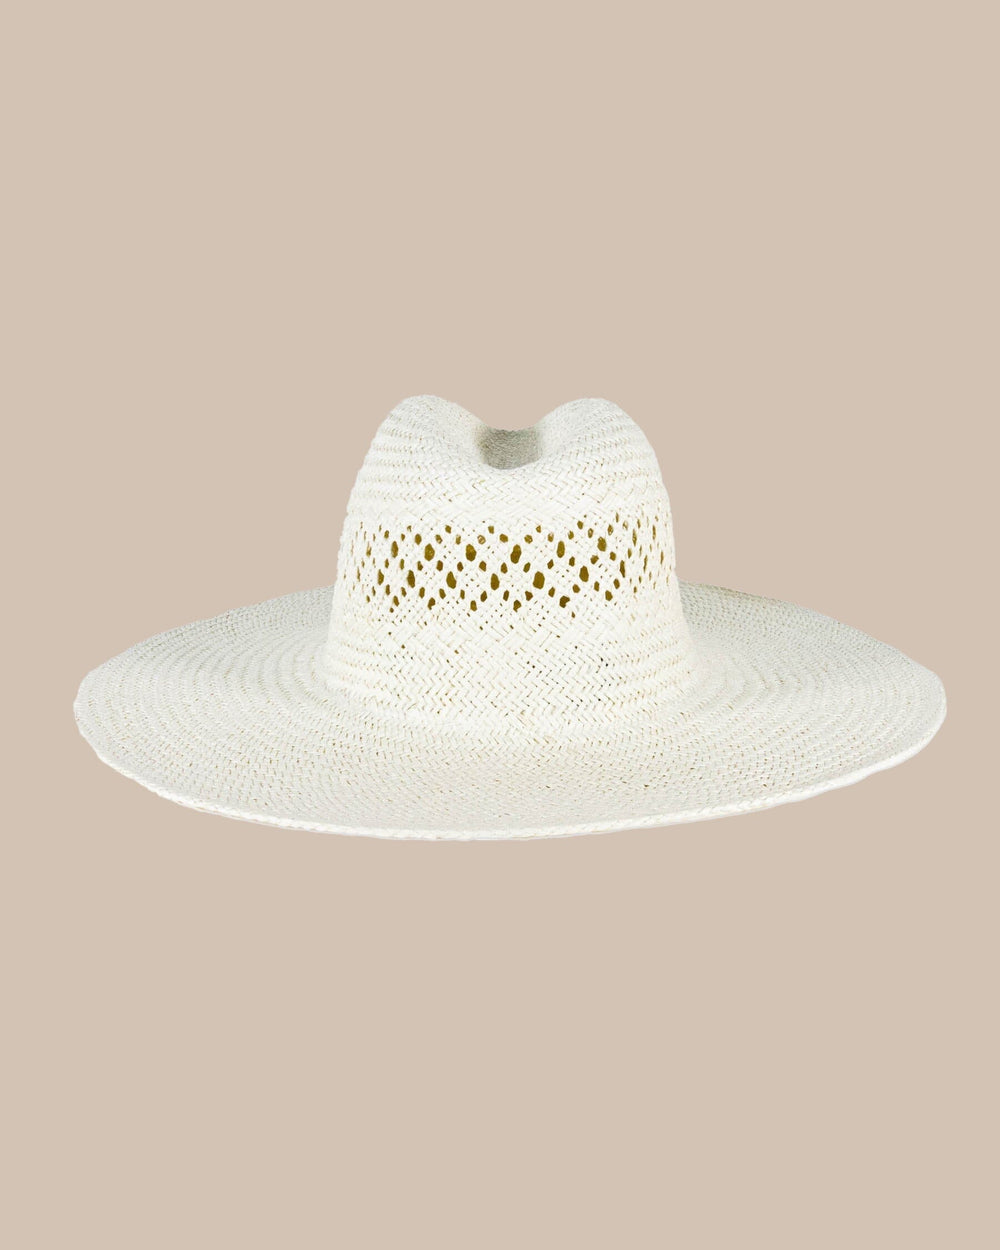 The back view of the Southern Tide Diamond Packable Beach Hat by Southern Tide - White